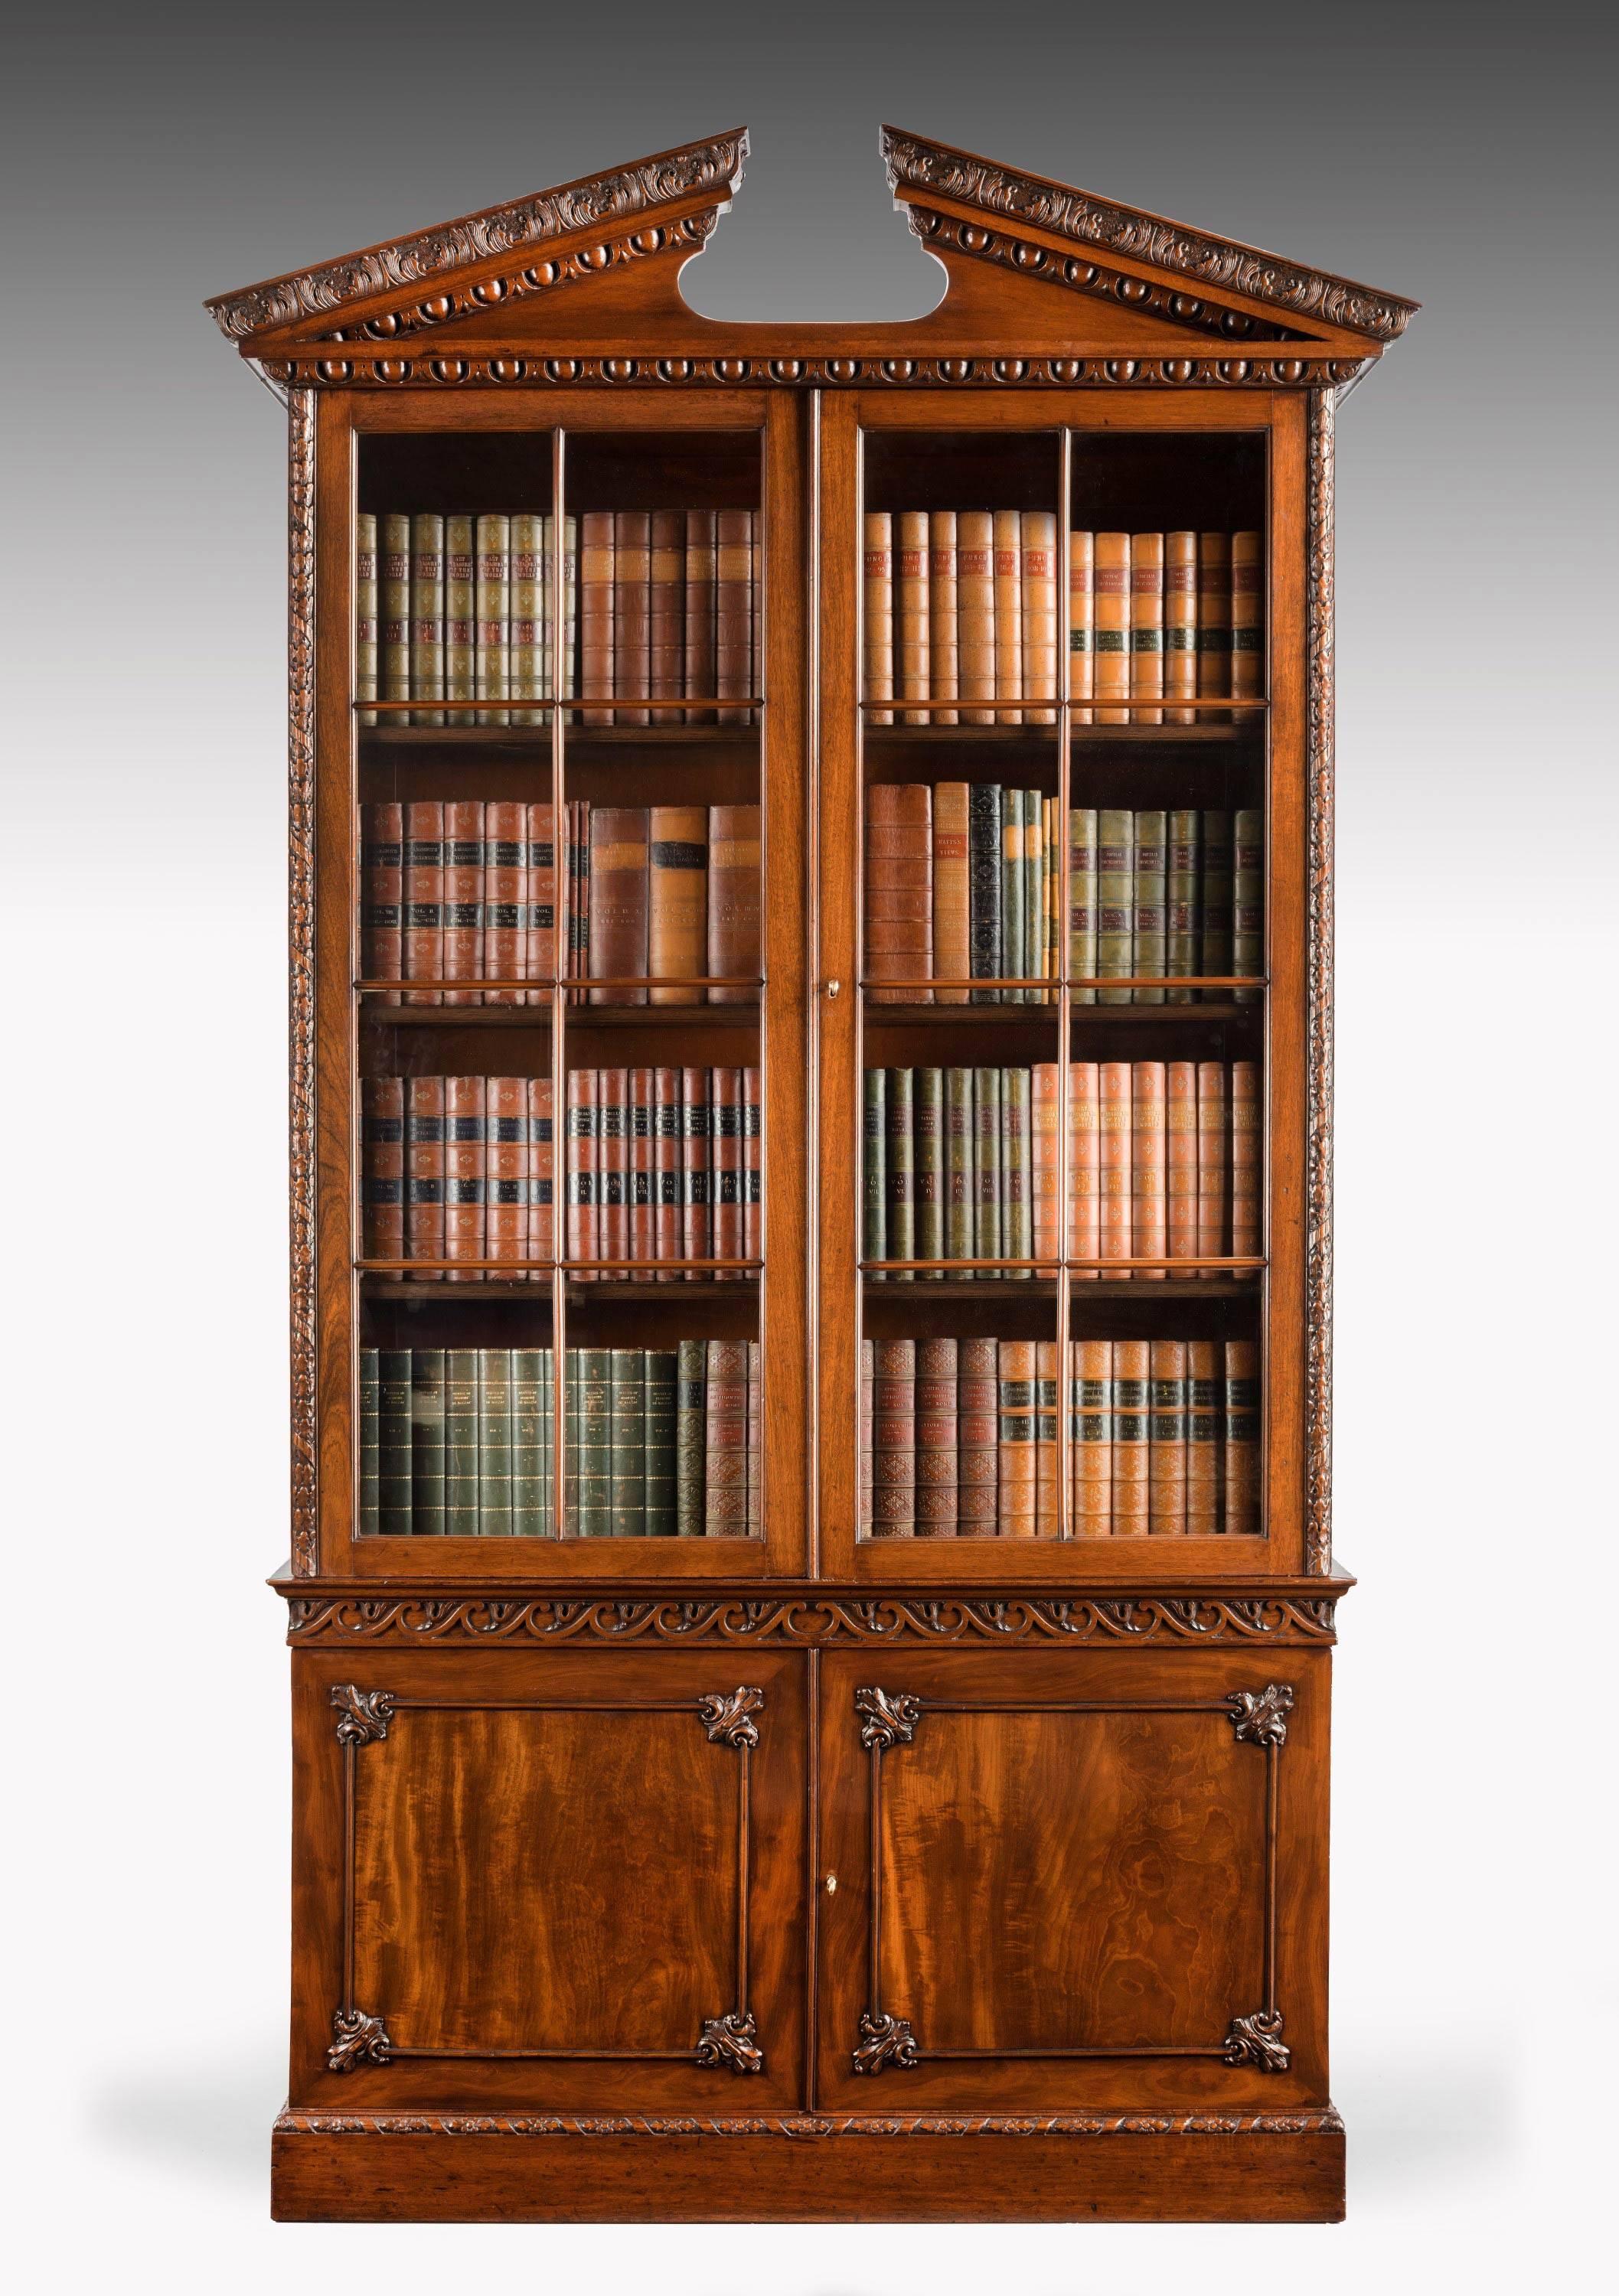 A good and architecturally strong Chippendale period mahogany low waisted bookcase. The upper section retaining the original glazed doors. The lower doors of matching left and right hand veneers with sharply carved detail. The top with Egg and Dart